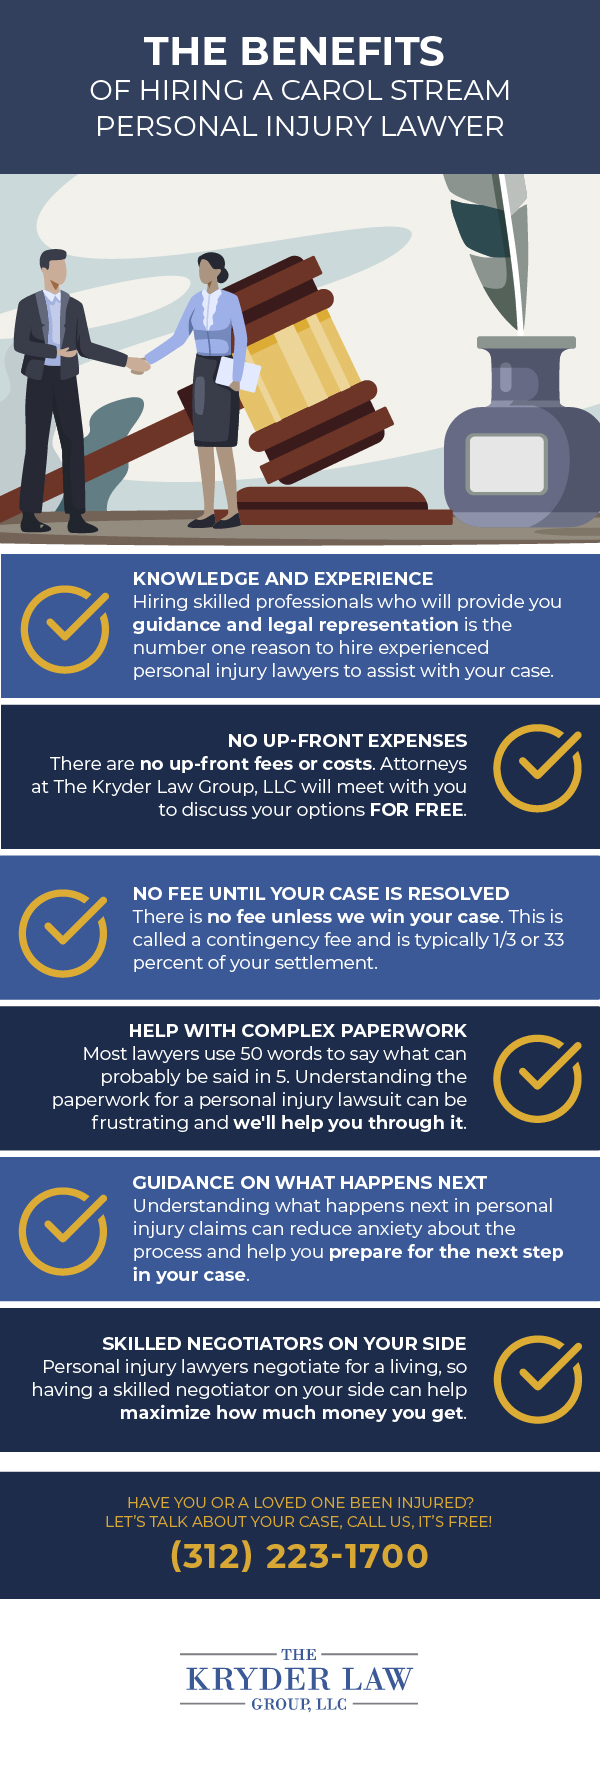 The Benefits of Hiring a Carol Stream Personal Injury Lawyer Infographic